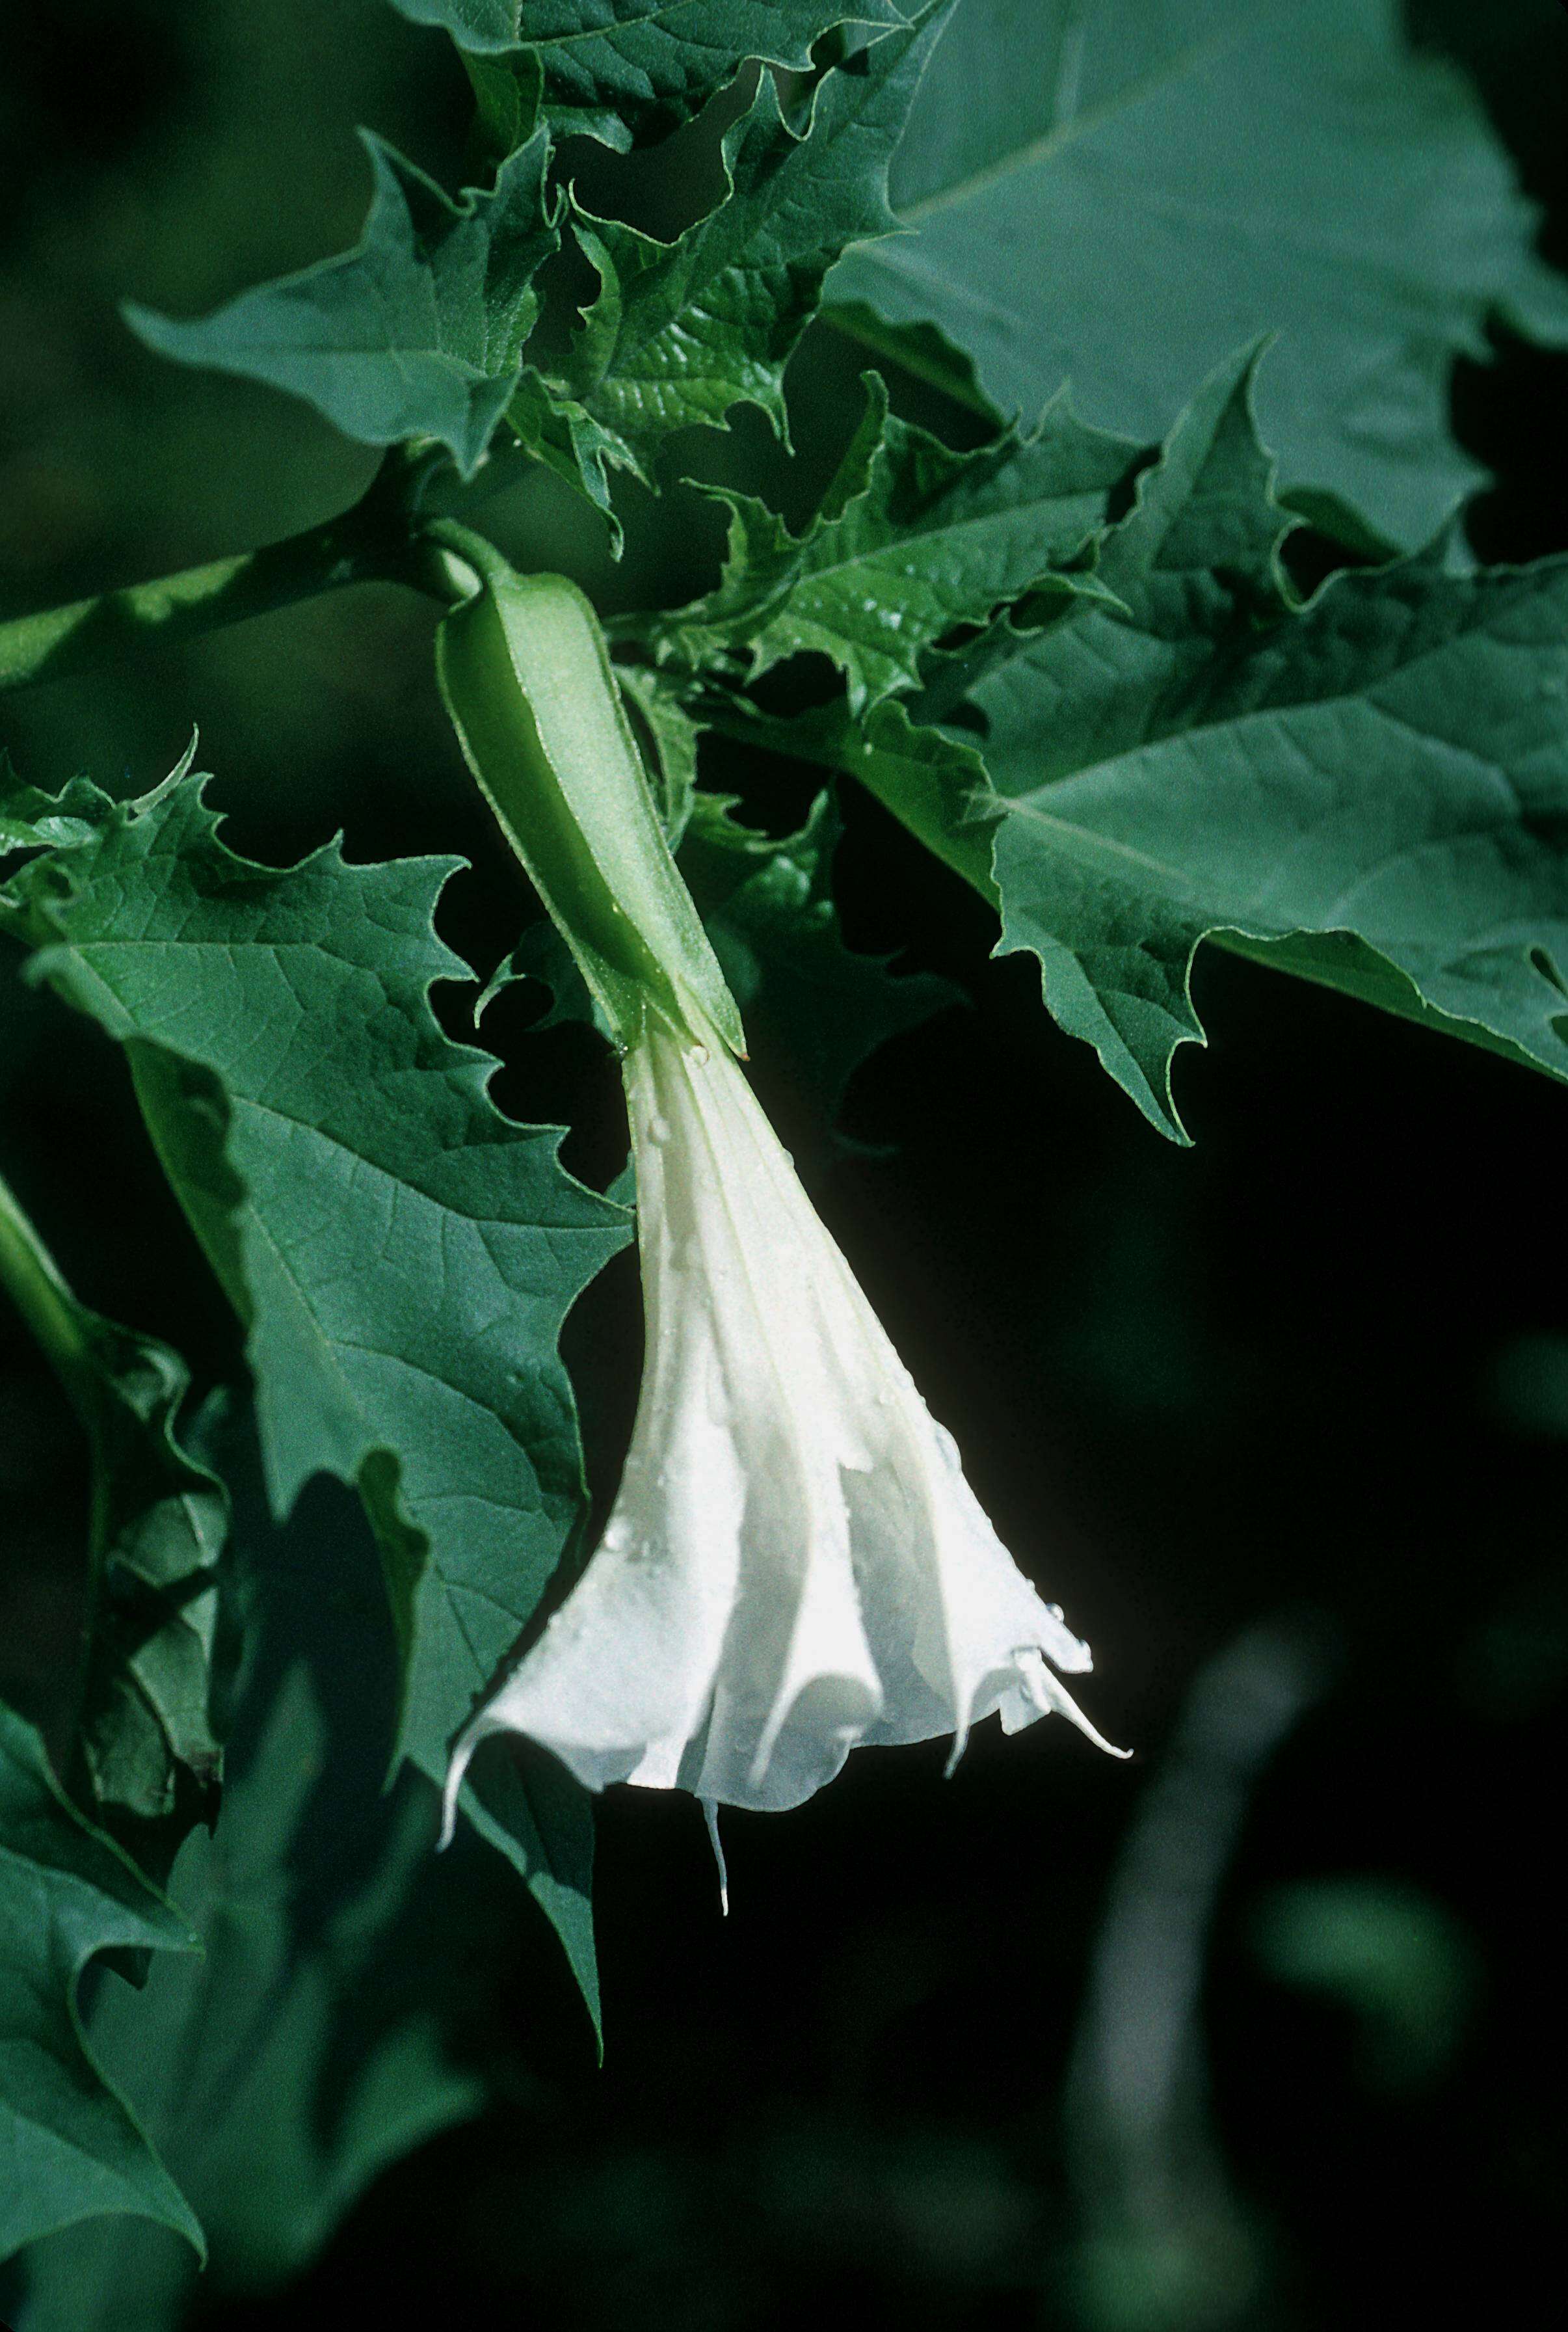 Image of Thorn-apple